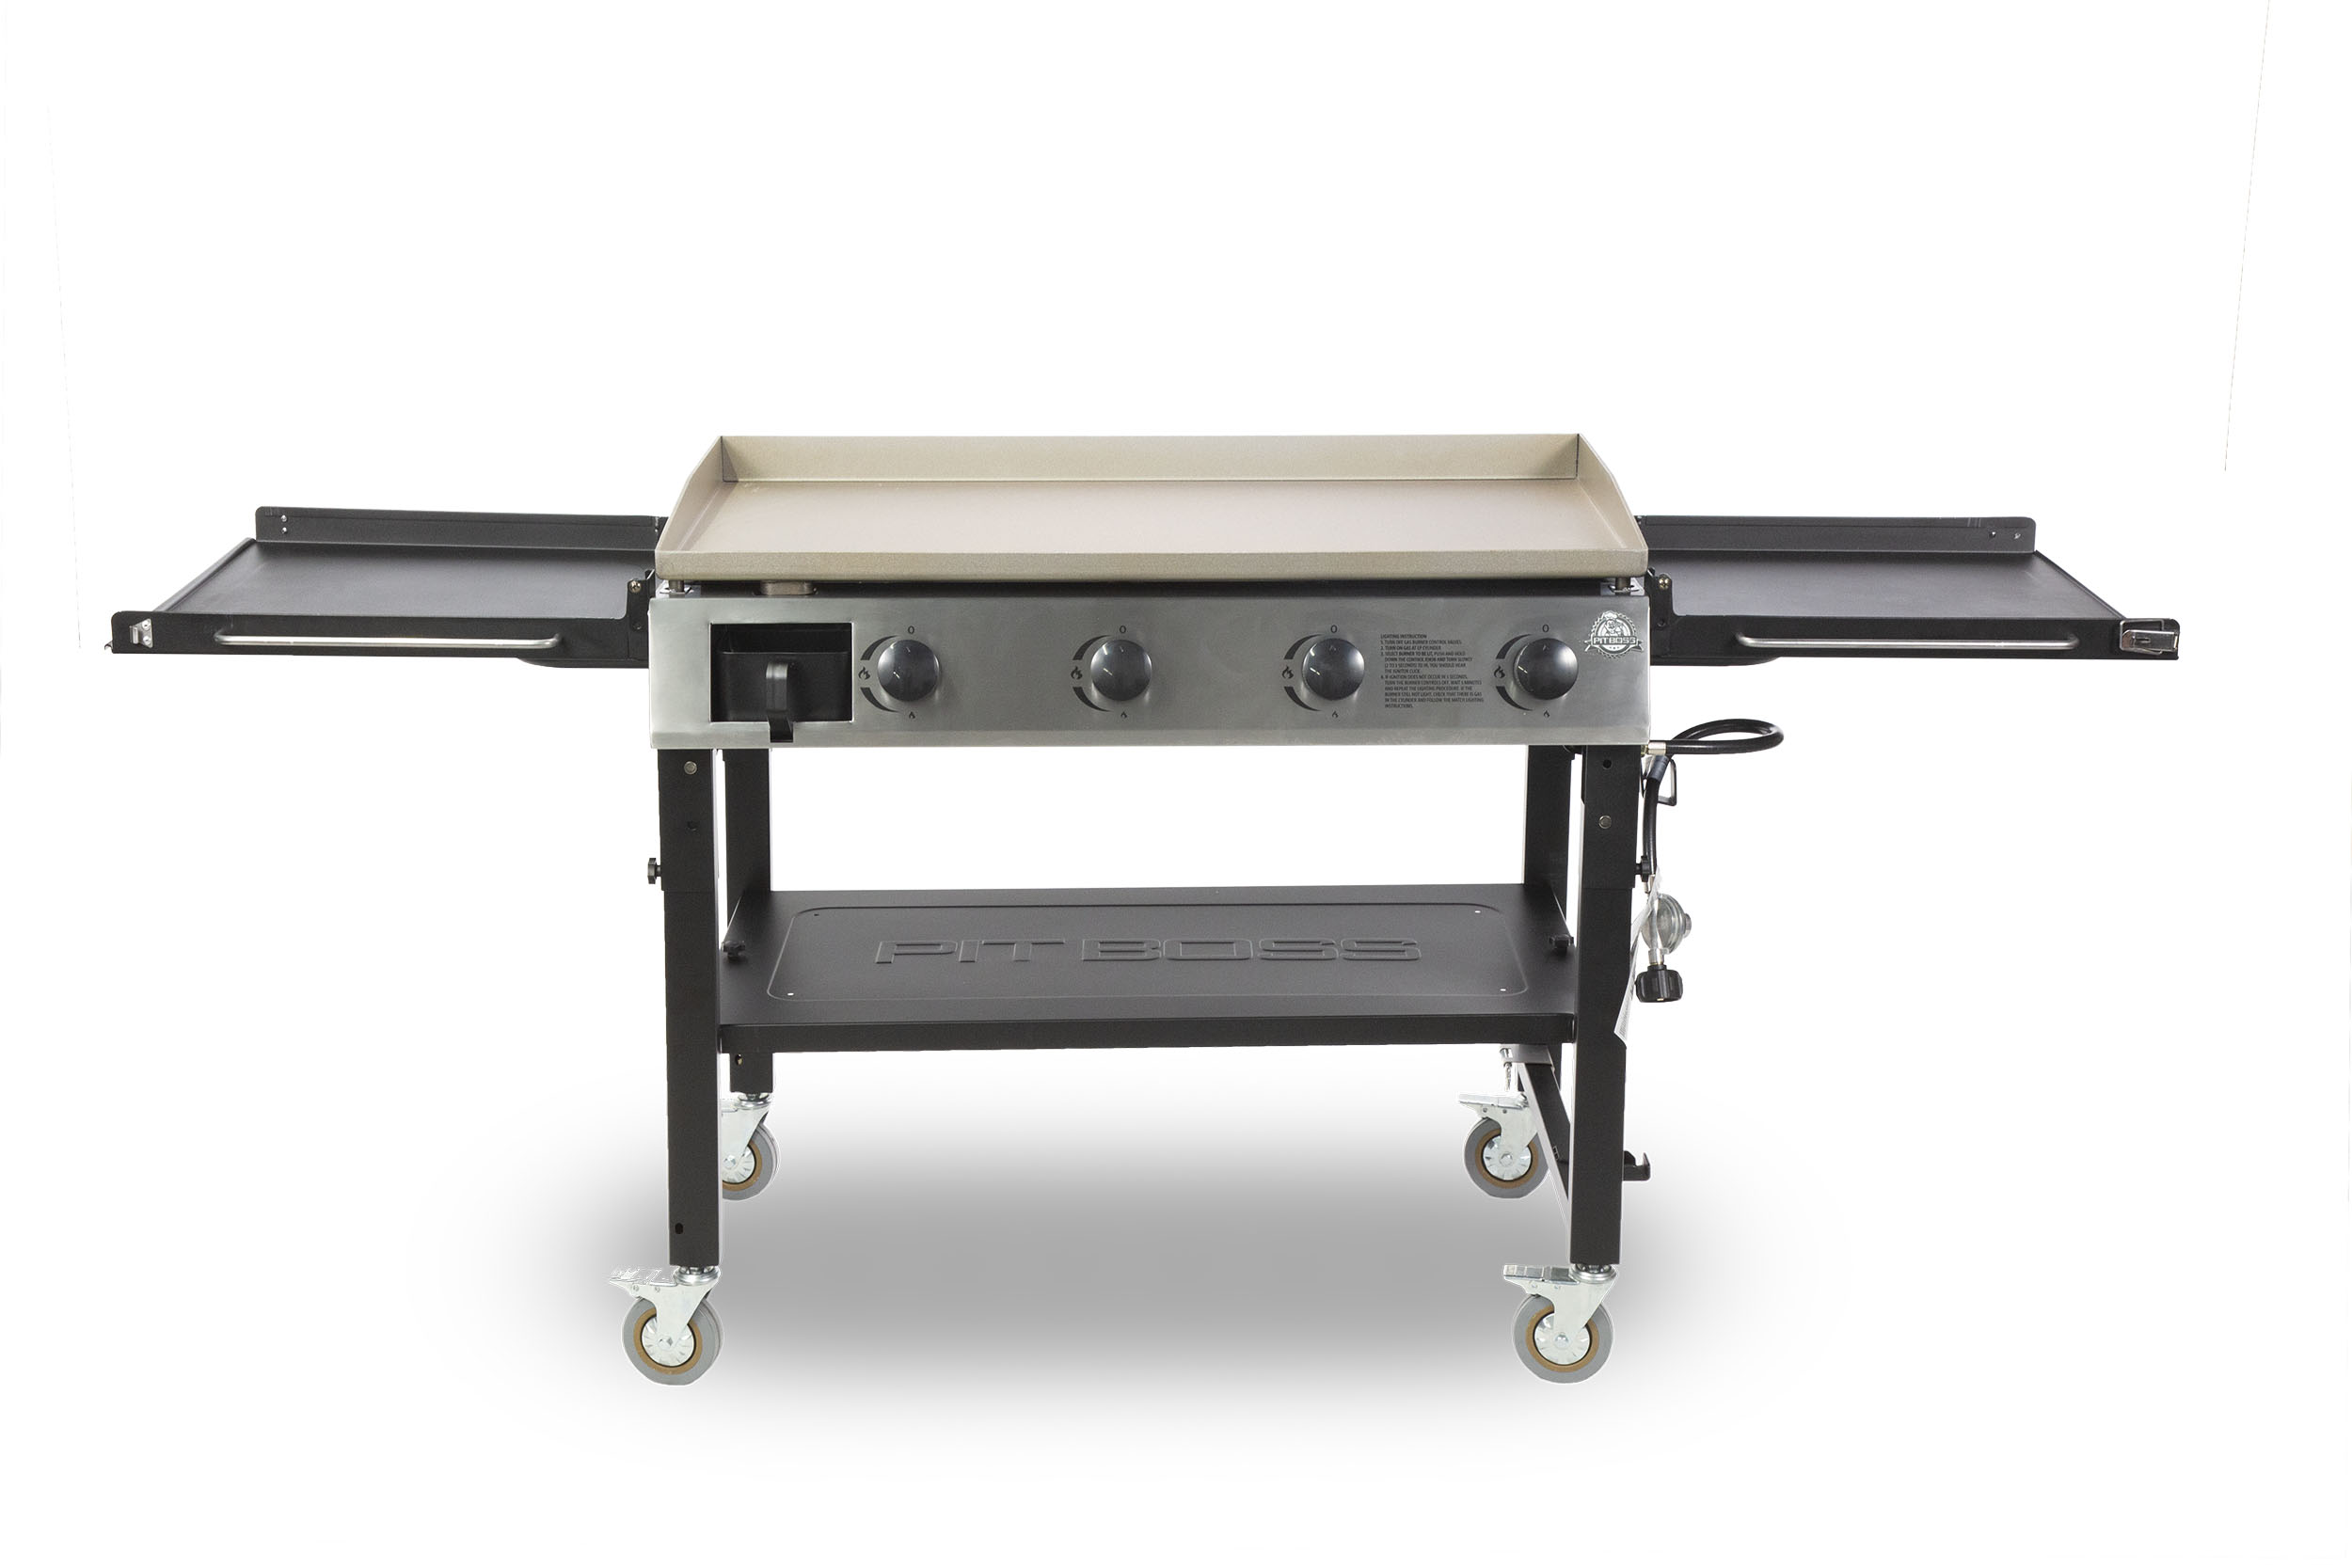 Pit Boss Deluxe 4-Burner Griddle w/ 2 Folding Side Shelves and Cover - PB757GD - image 1 of 6